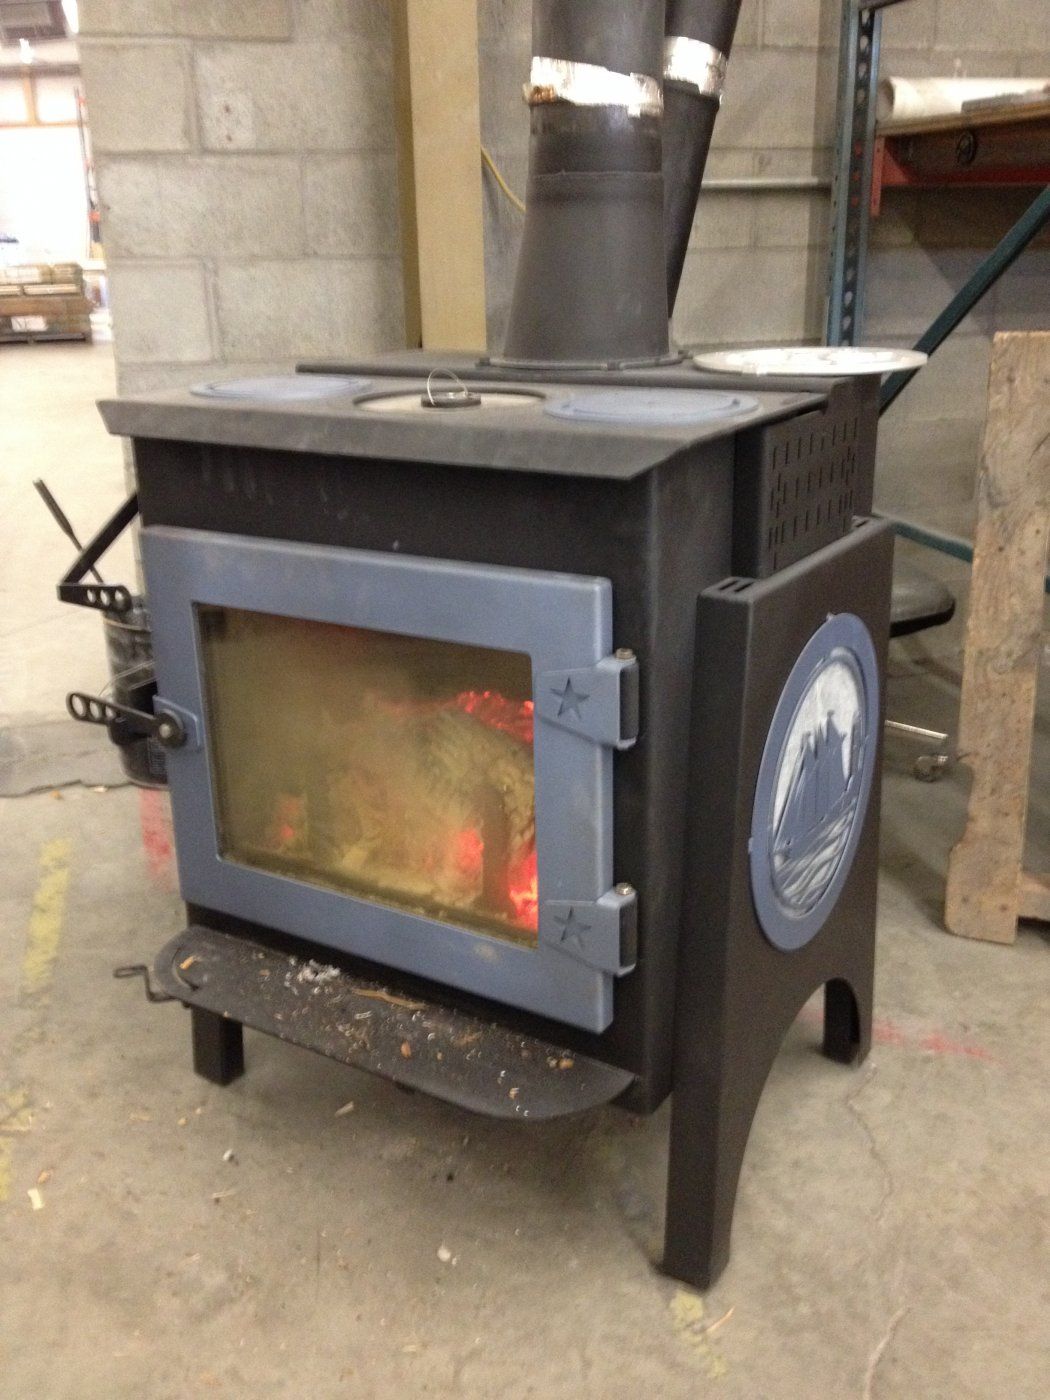 Pics of the Ideal Steel at the Woodstock Soapstone factory | Hearth.com